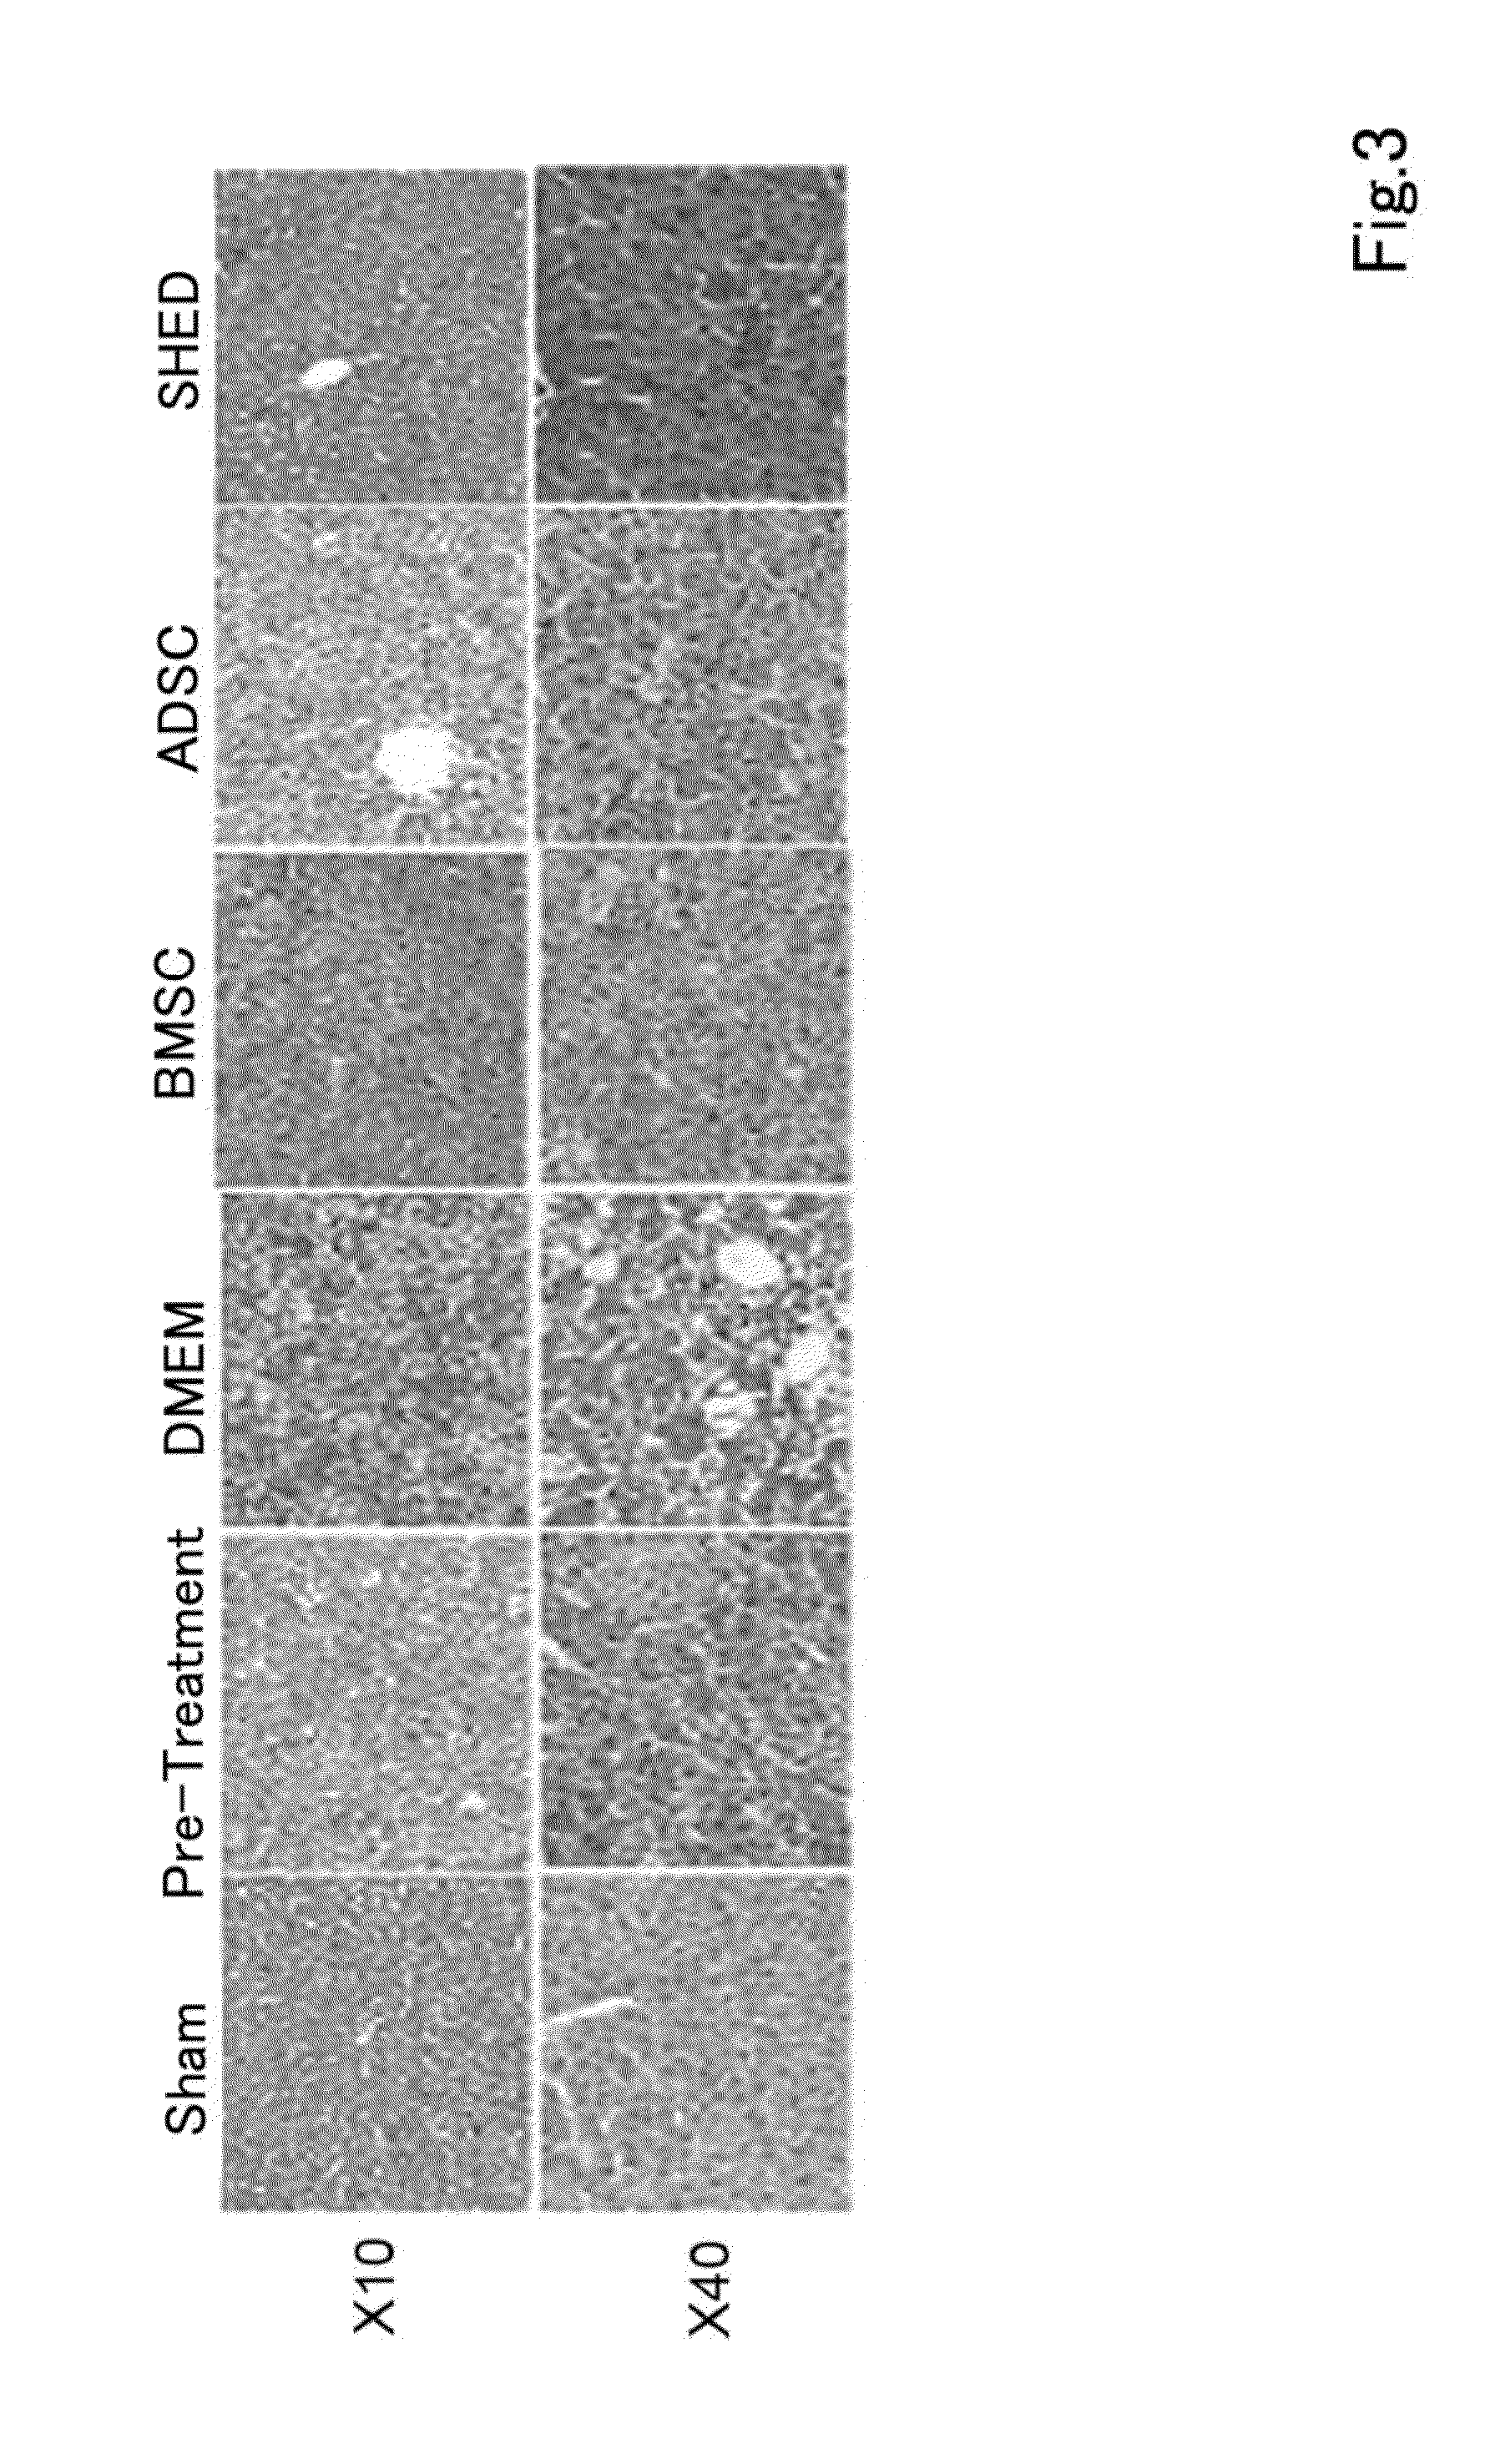 Composition for preventing or treating inflammatory disease